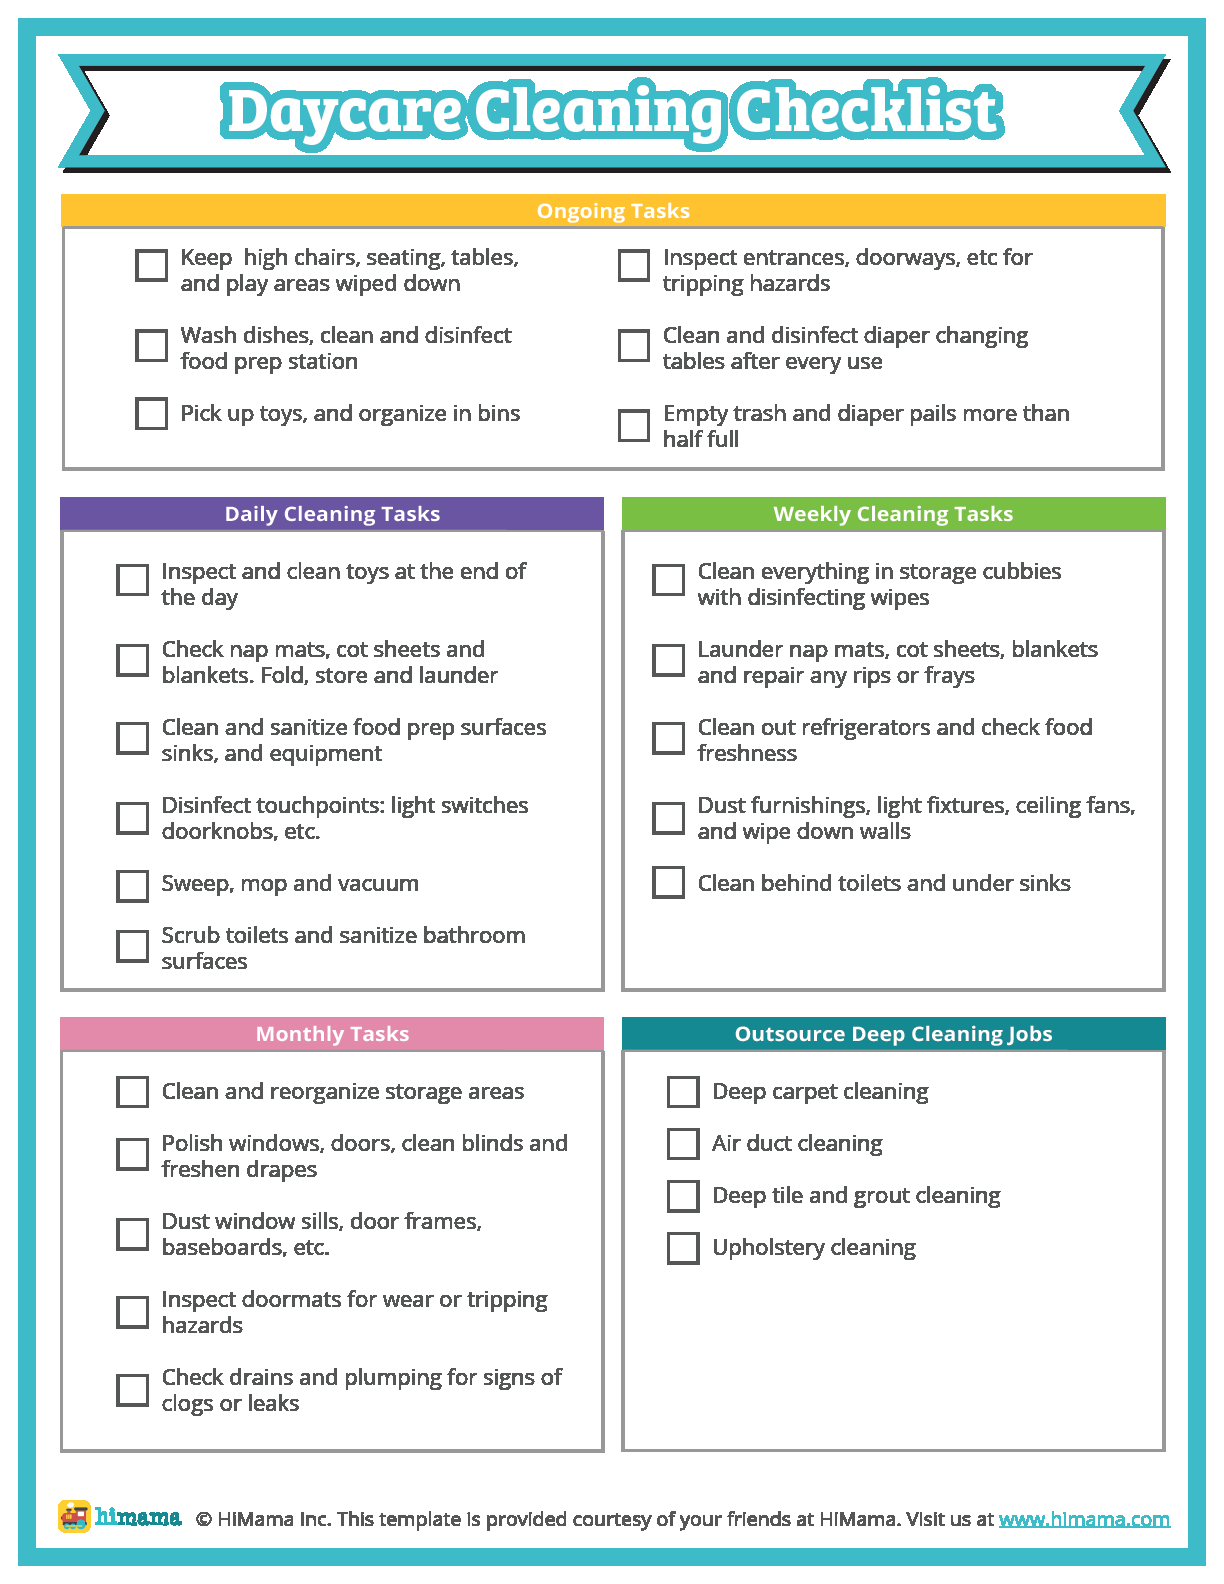 Daycare Cleaning Checklist - Free Templates  HiMama With Classroom Cleaning Checklist Template For Classroom Cleaning Checklist Template